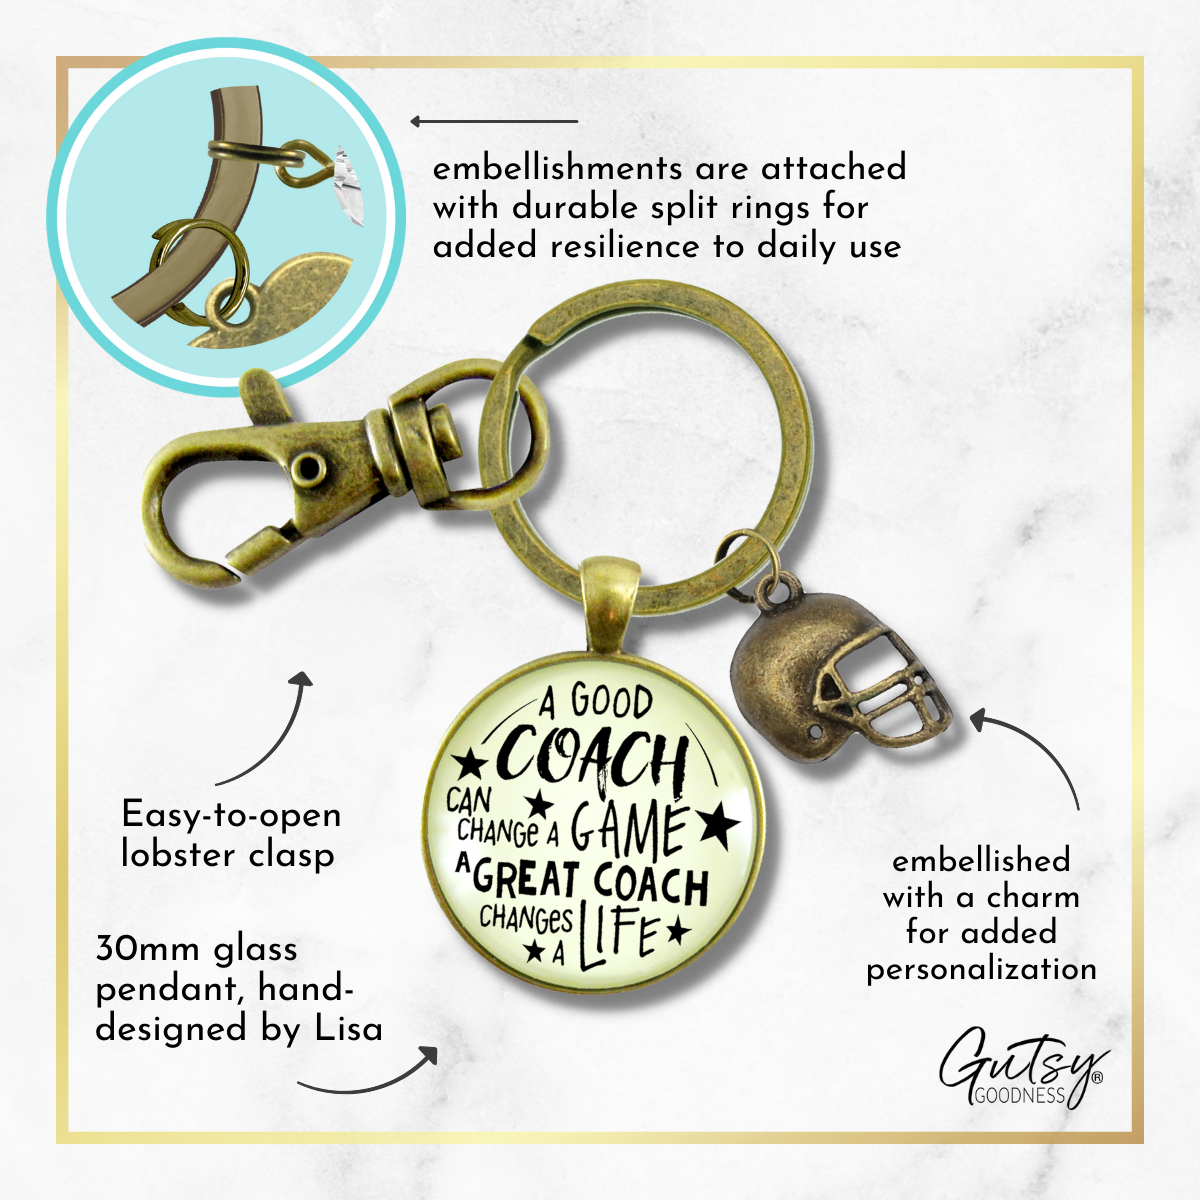 Football Coaching Sport Keychain Great Coach Changes Life Thank You Gift - Gutsy Goodness Handmade Jewelry;Football Coaching Sport Keychain Great Coach Changes Life Thank You Gift - Gutsy Goodness Handmade Jewelry Gifts